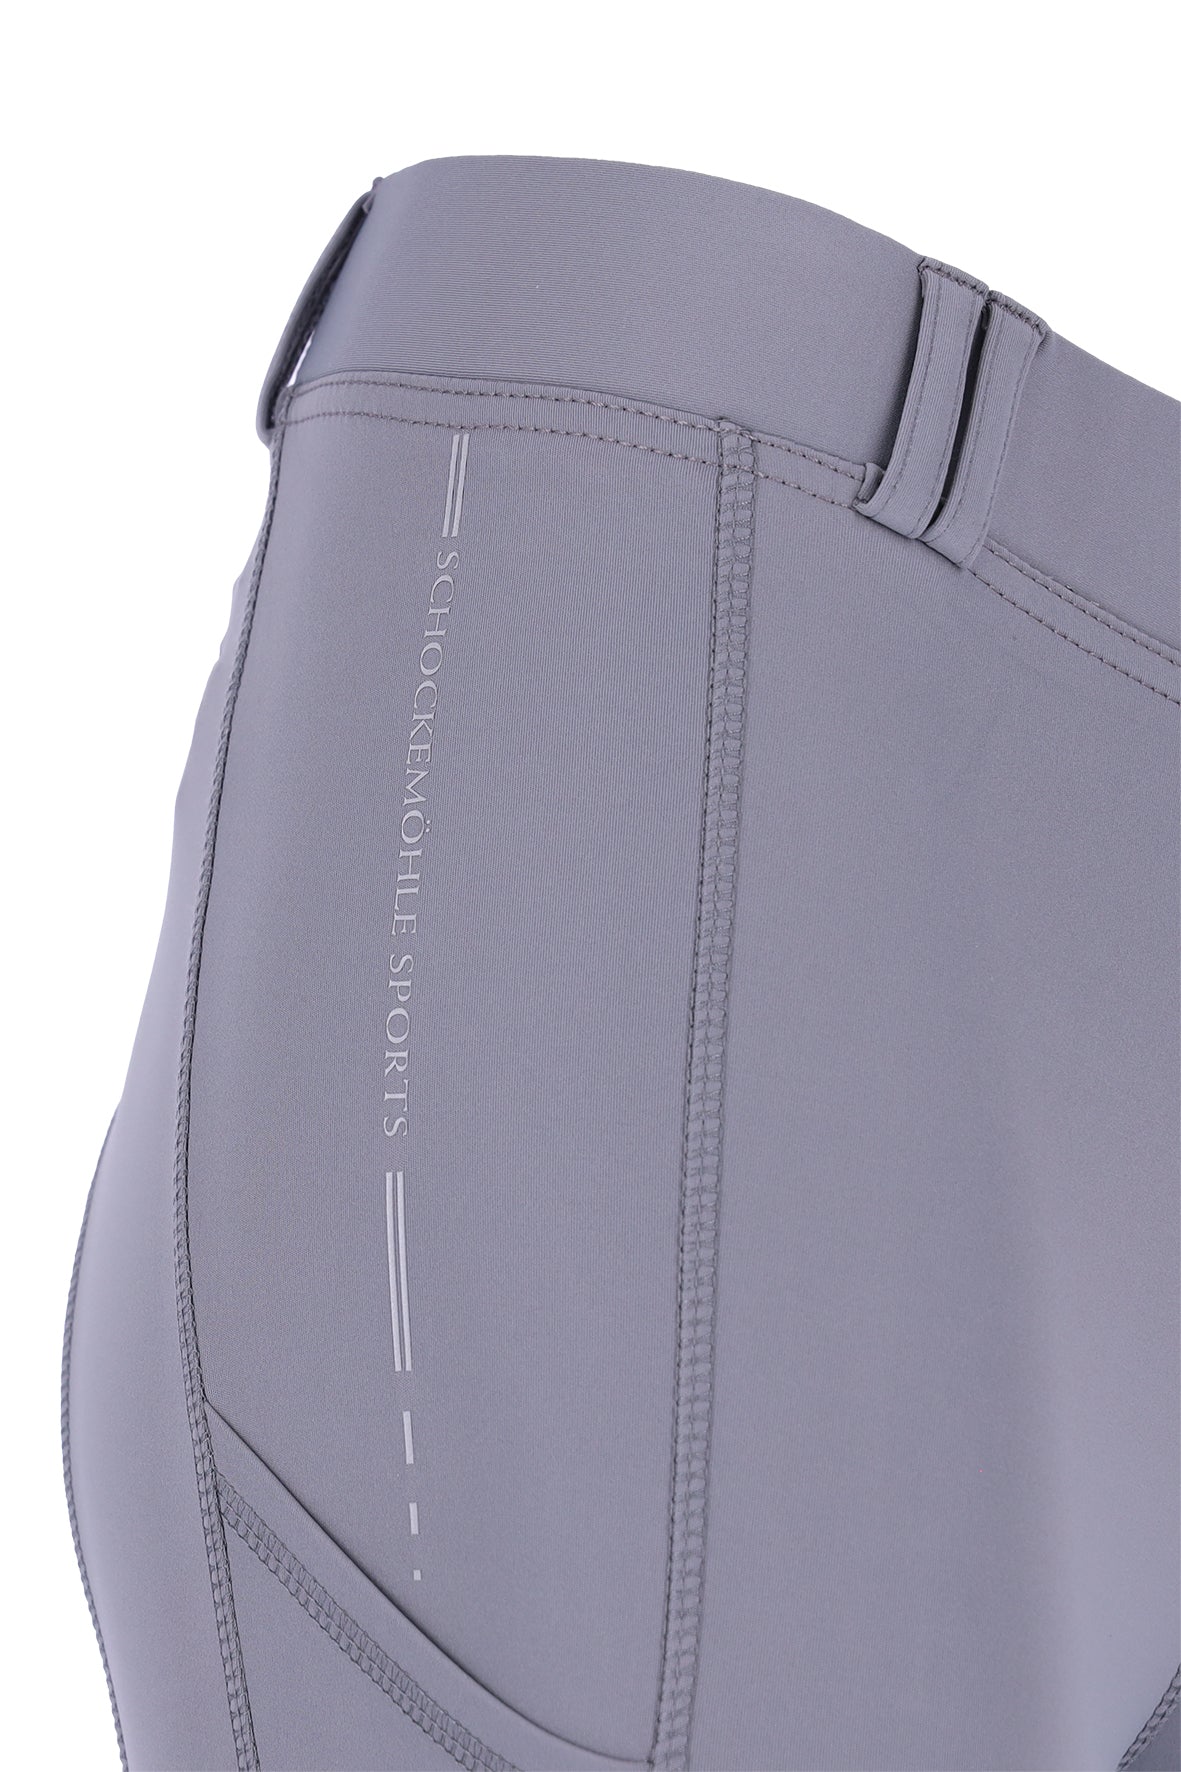 S/Mohle Wmn New Pocket Riding Tights FS Style Slate Grey